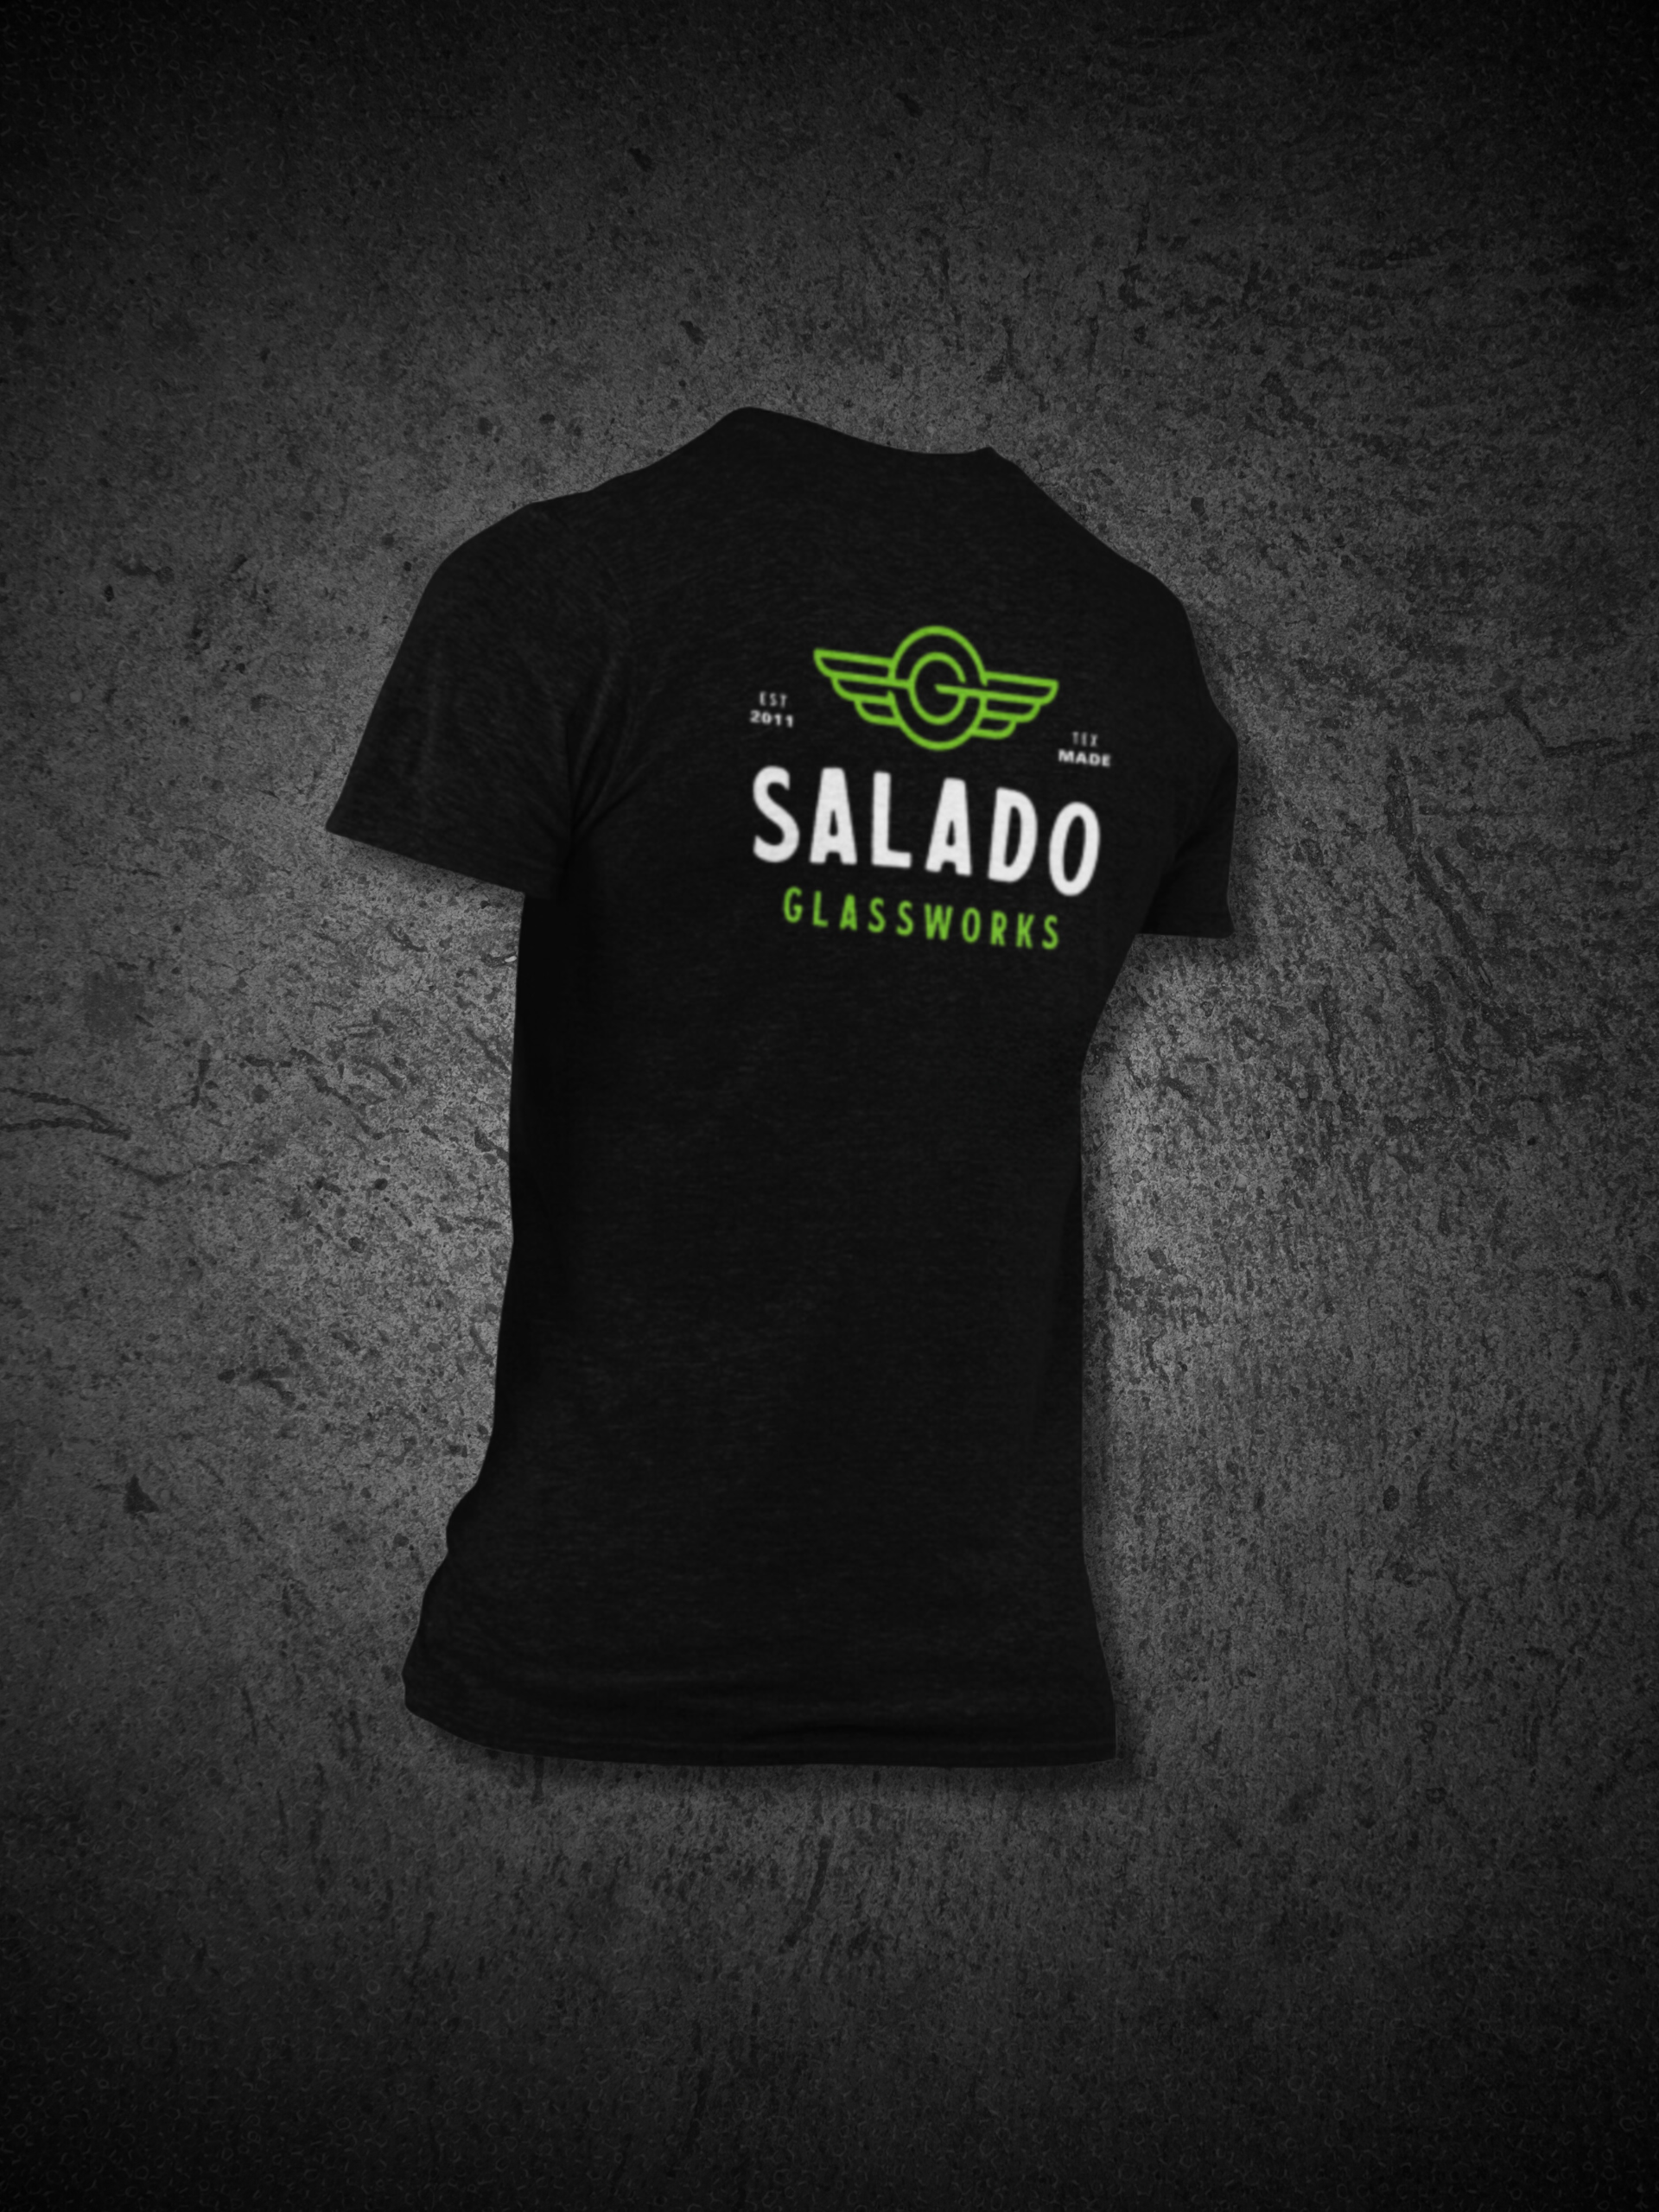 A black t-shirt with the word salado on it